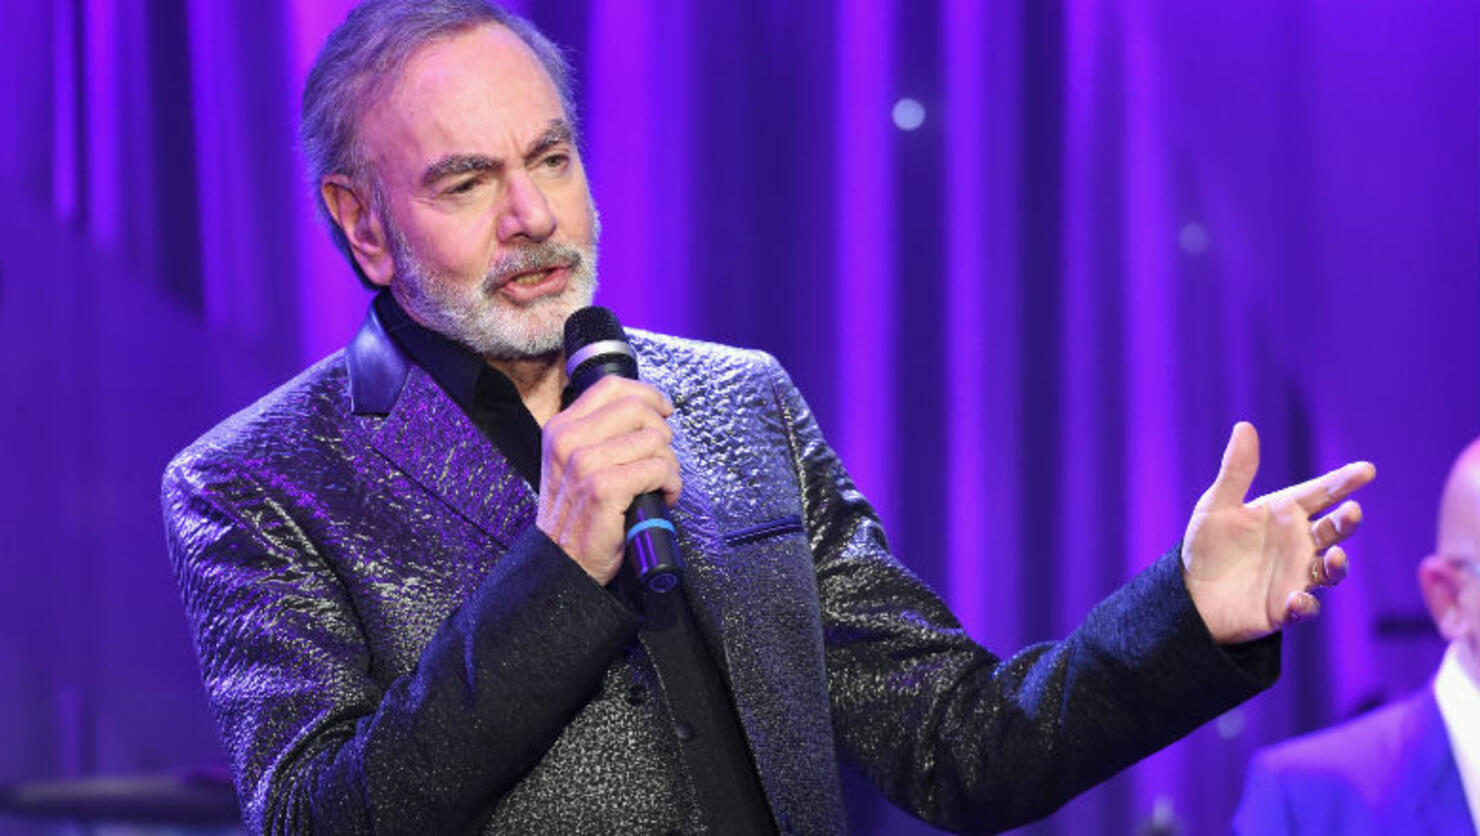 Neil Diamond retires from touring after Parkinson's diagnosis